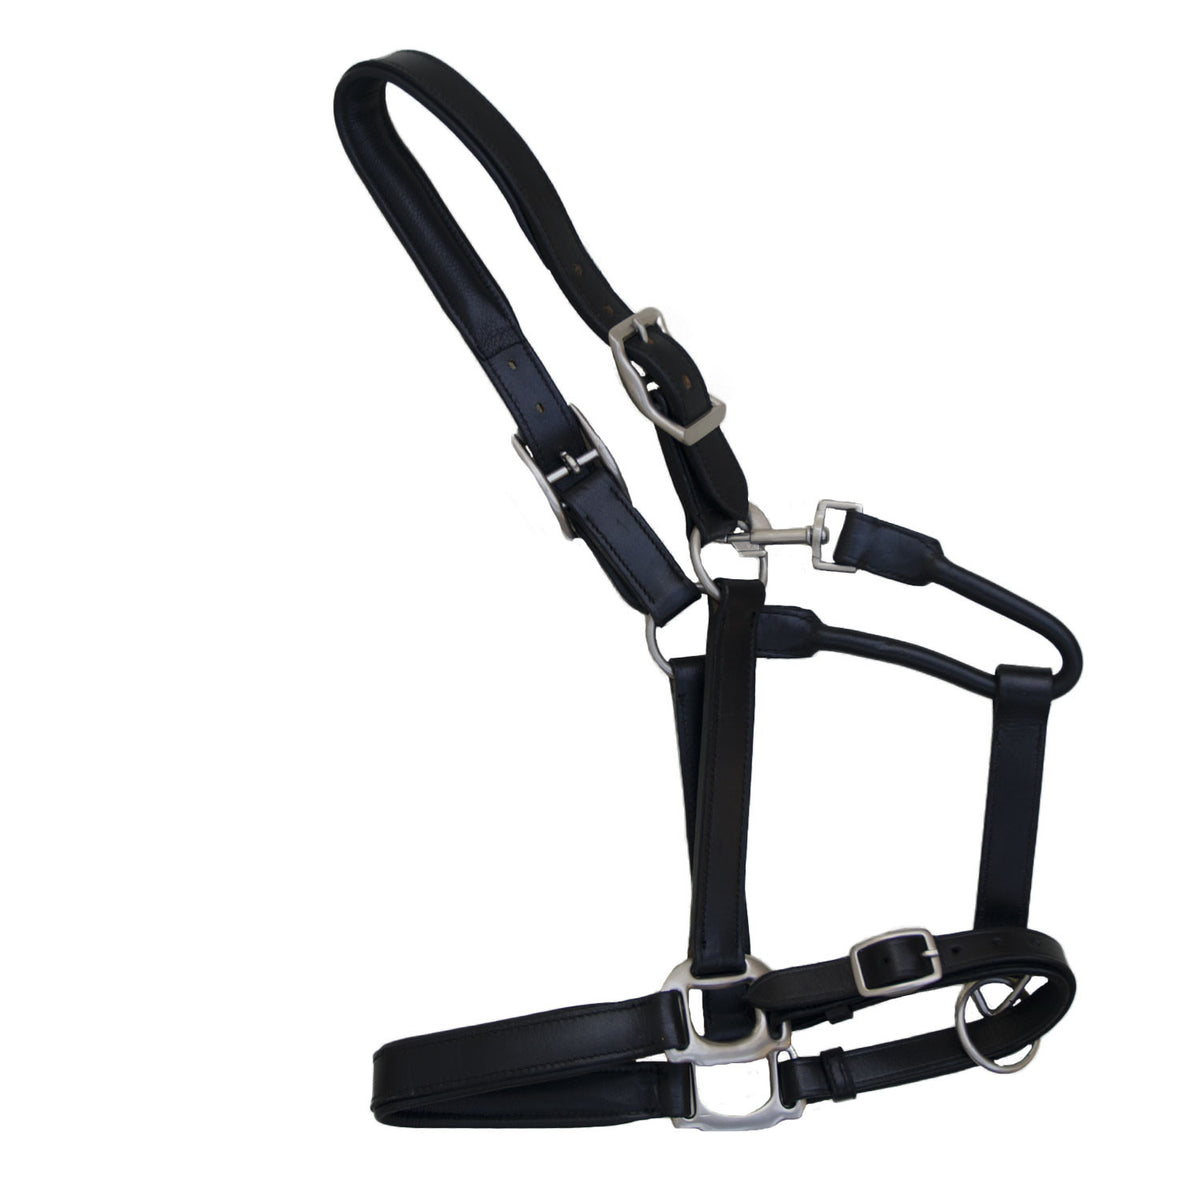 Padded leather halter